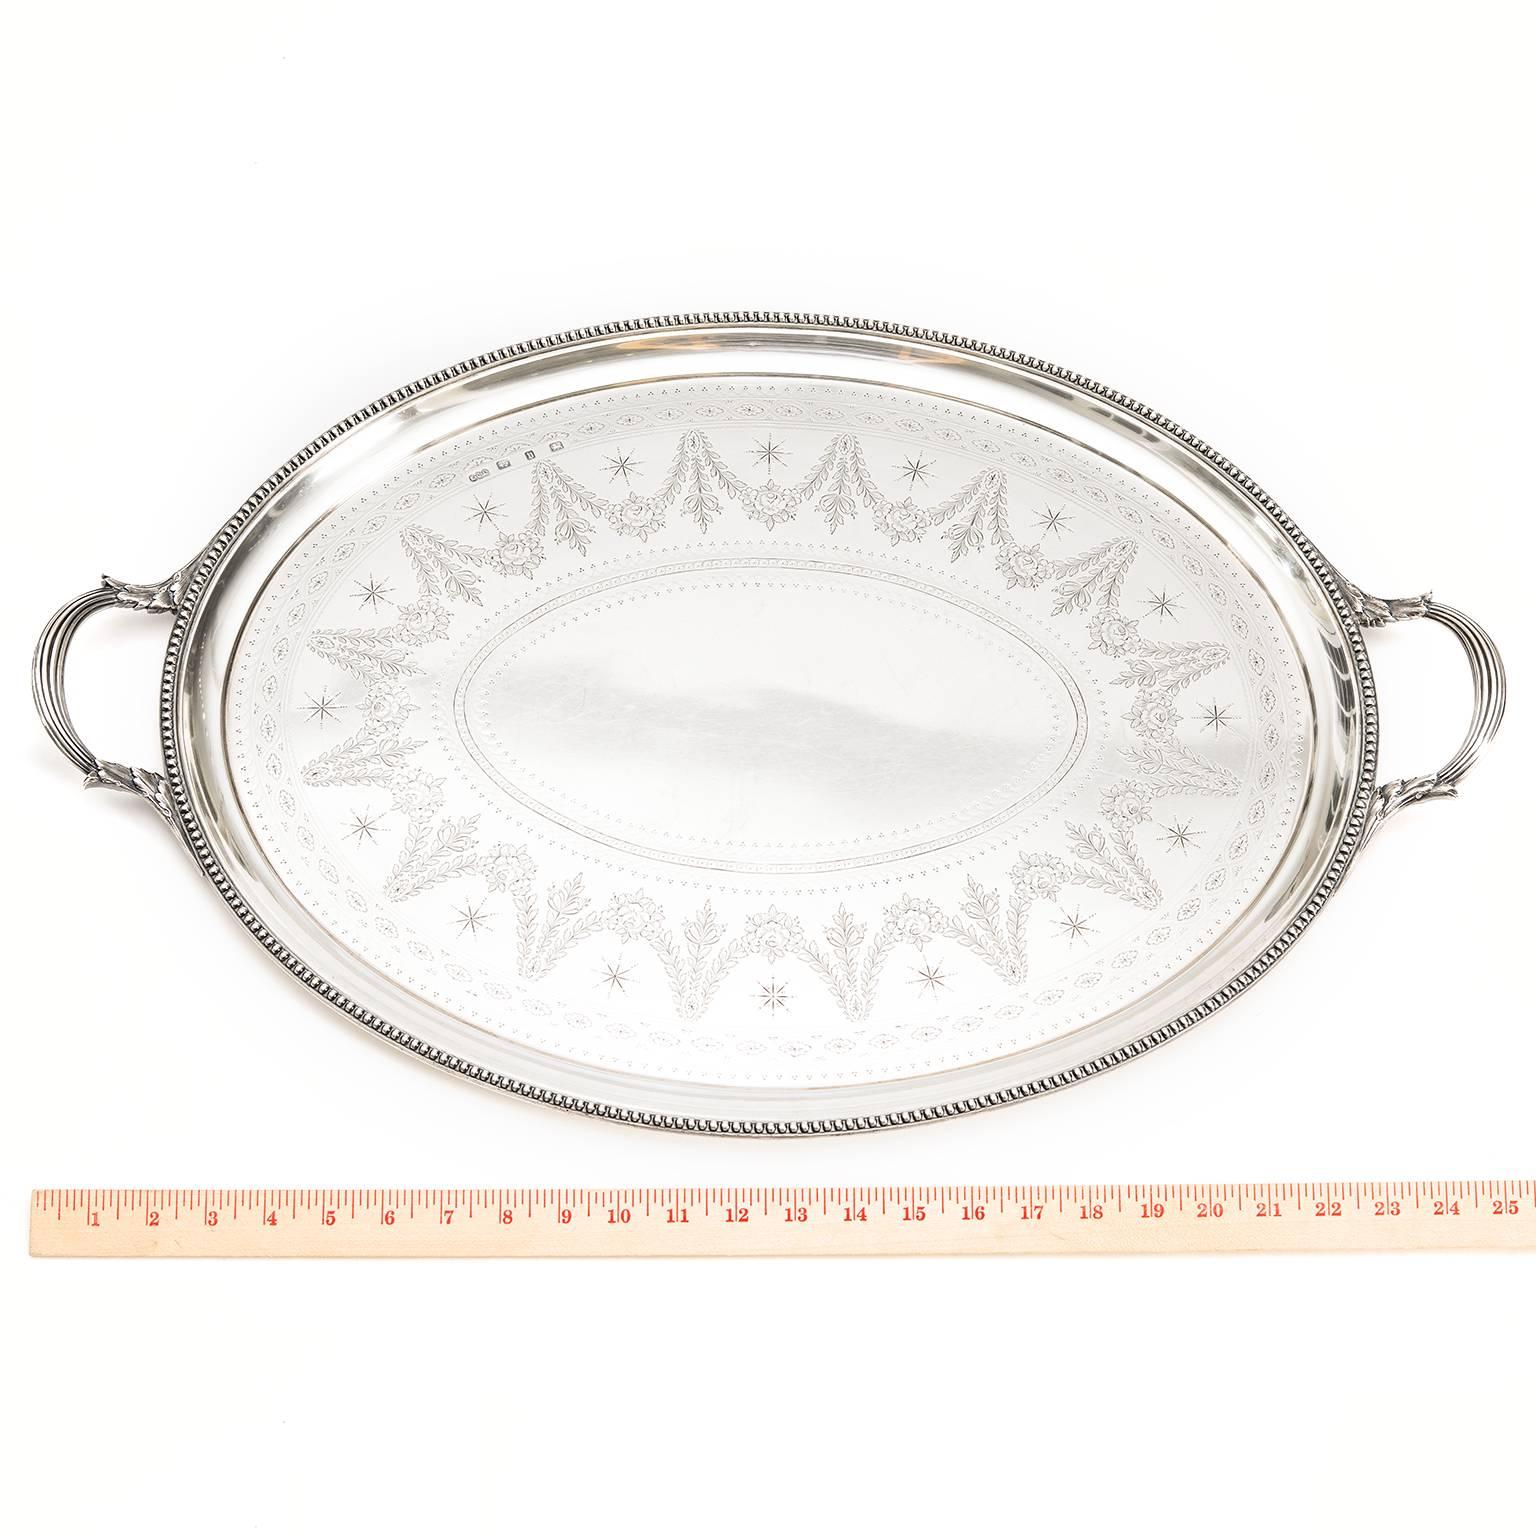 Late 19th Century Stunning Elkington & Co. Sterling Tray